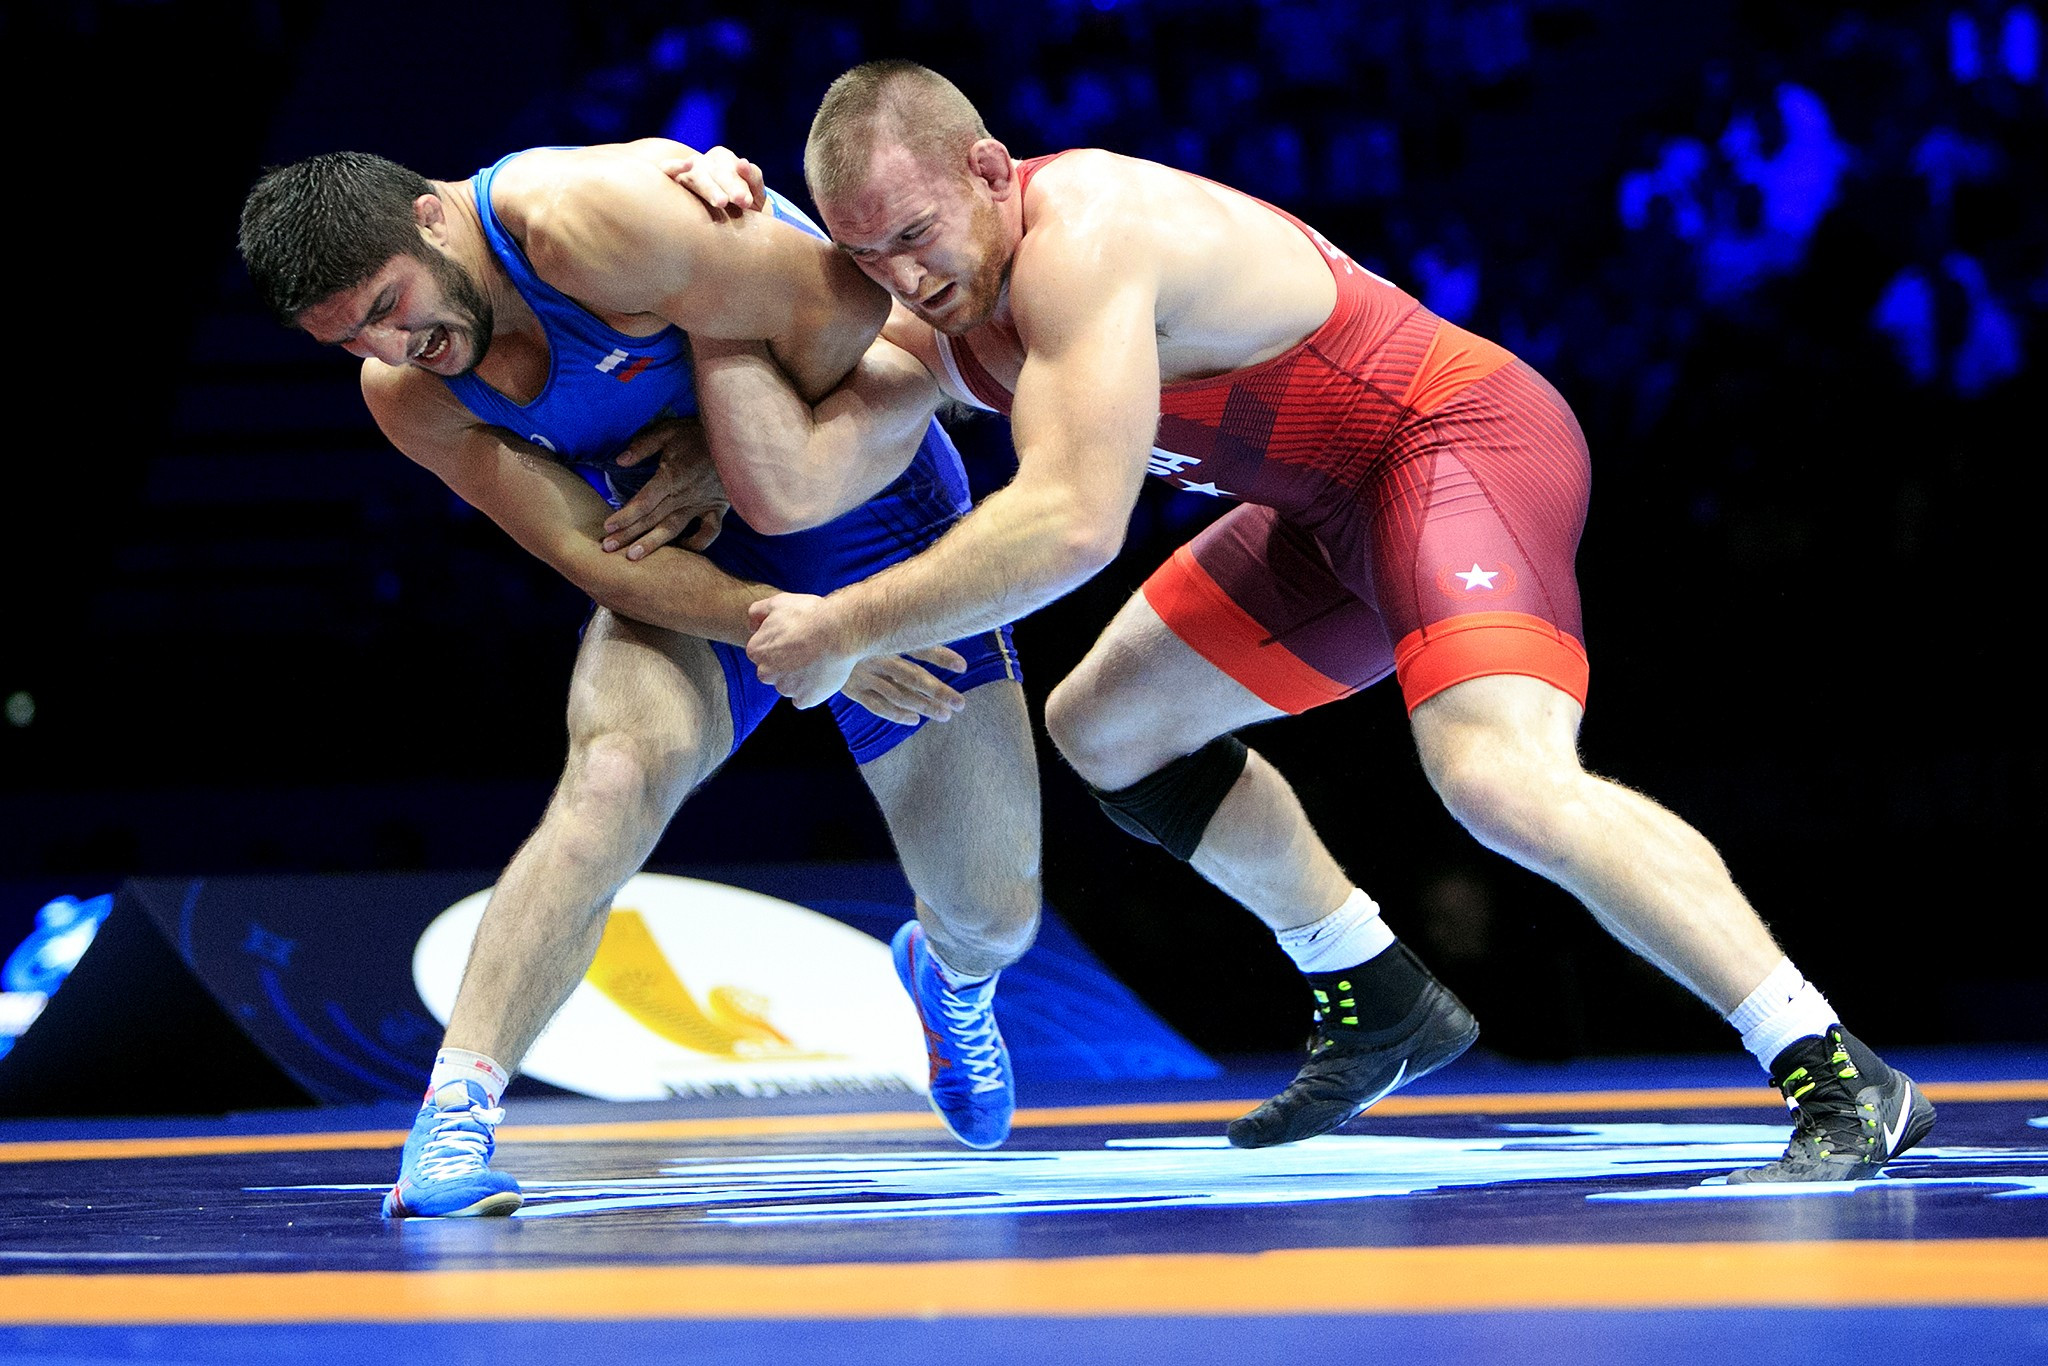 Kyle Snyder of the US took on Russia's Abdulrashid Sadulaev in the 97kg final ©UWW